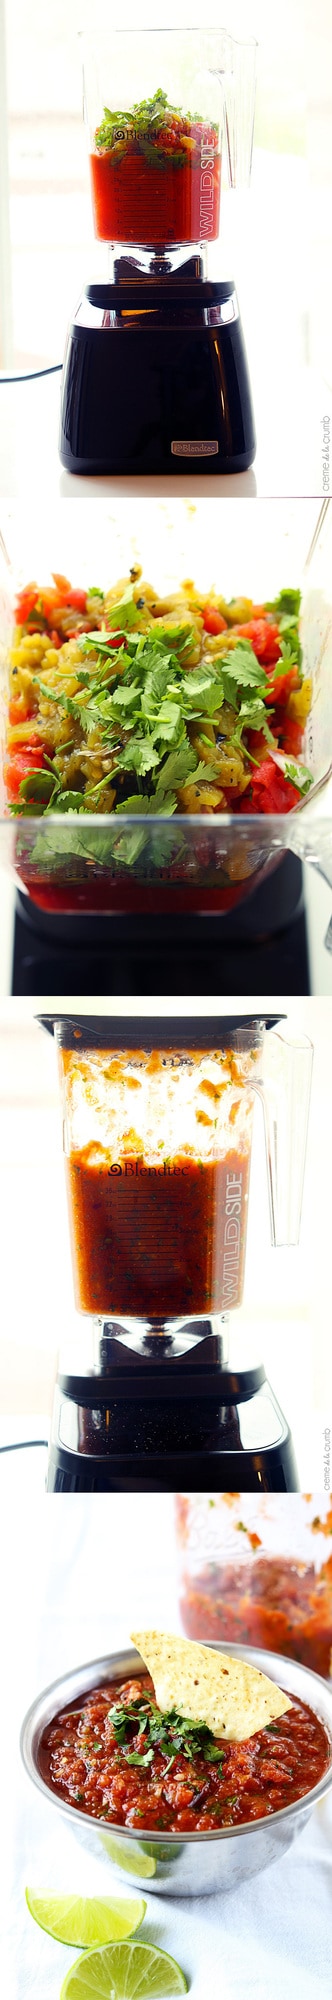 four images with blender salsa in a blender and in a metal bowl with a chip in it.